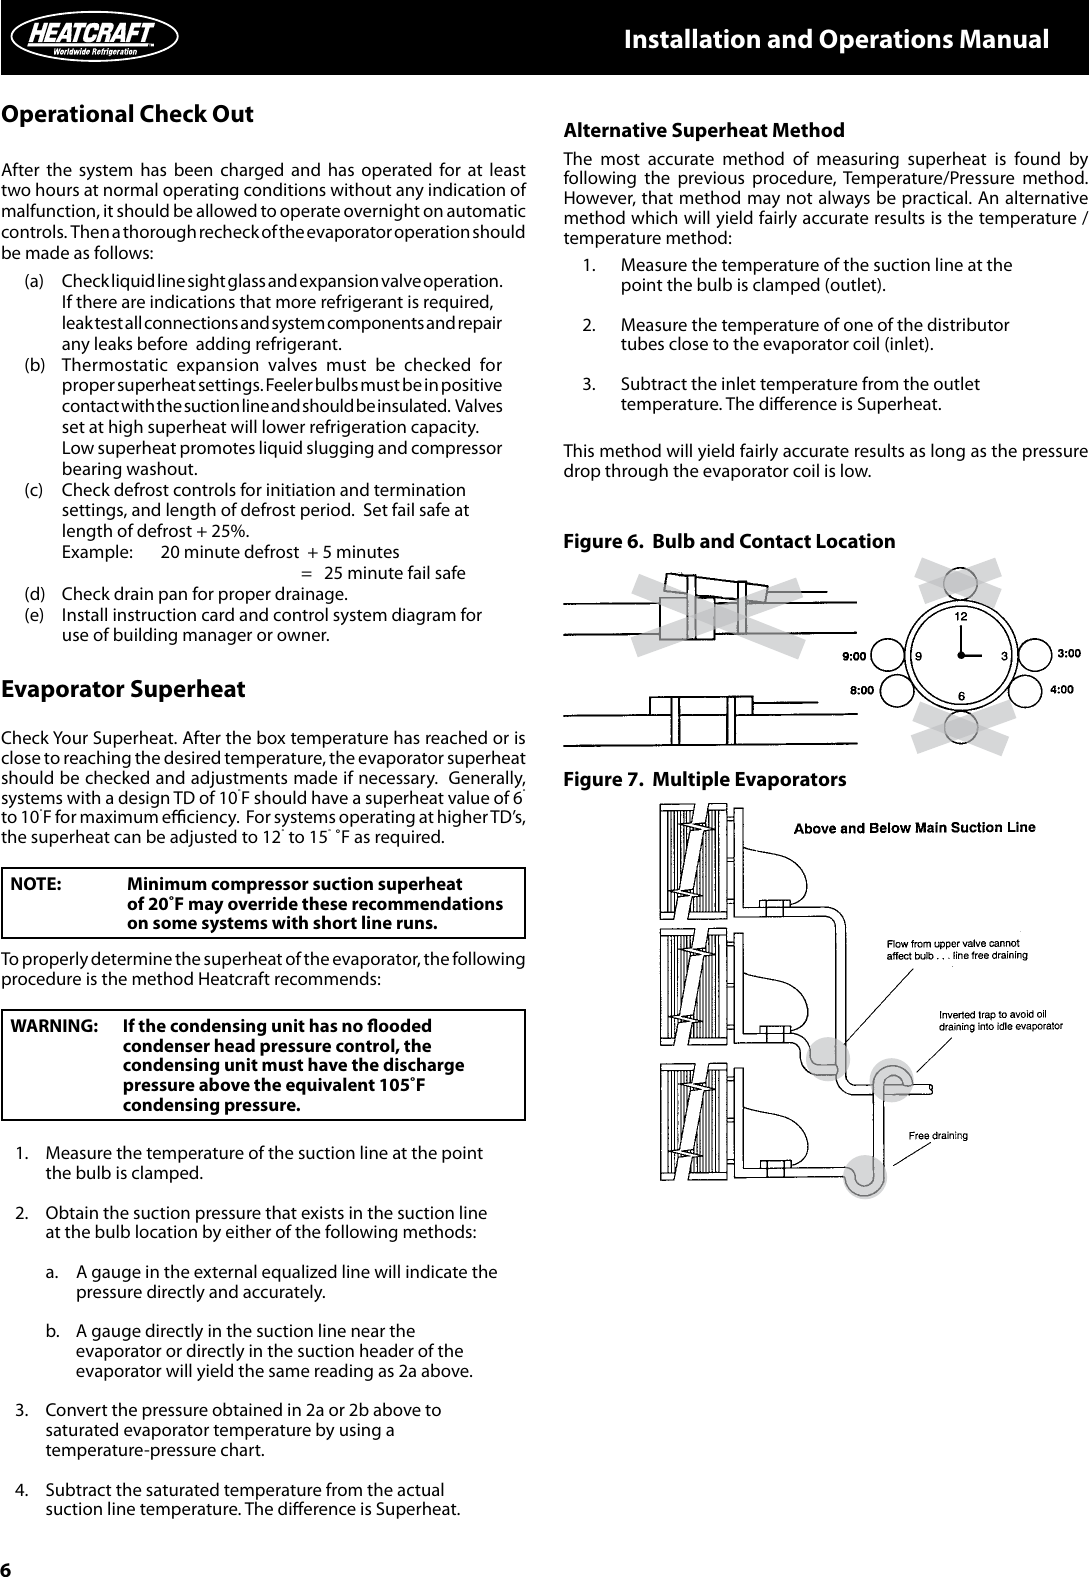 Page 6 of 8 - Heatcraft-Refrigeration-Products Heatcraft-Refrigeration-Products-Unit-Coolers-H-Im-Uc-Users-Manual-  Heatcraft-refrigeration-products-unit-coolers-h-im-uc-users-manual